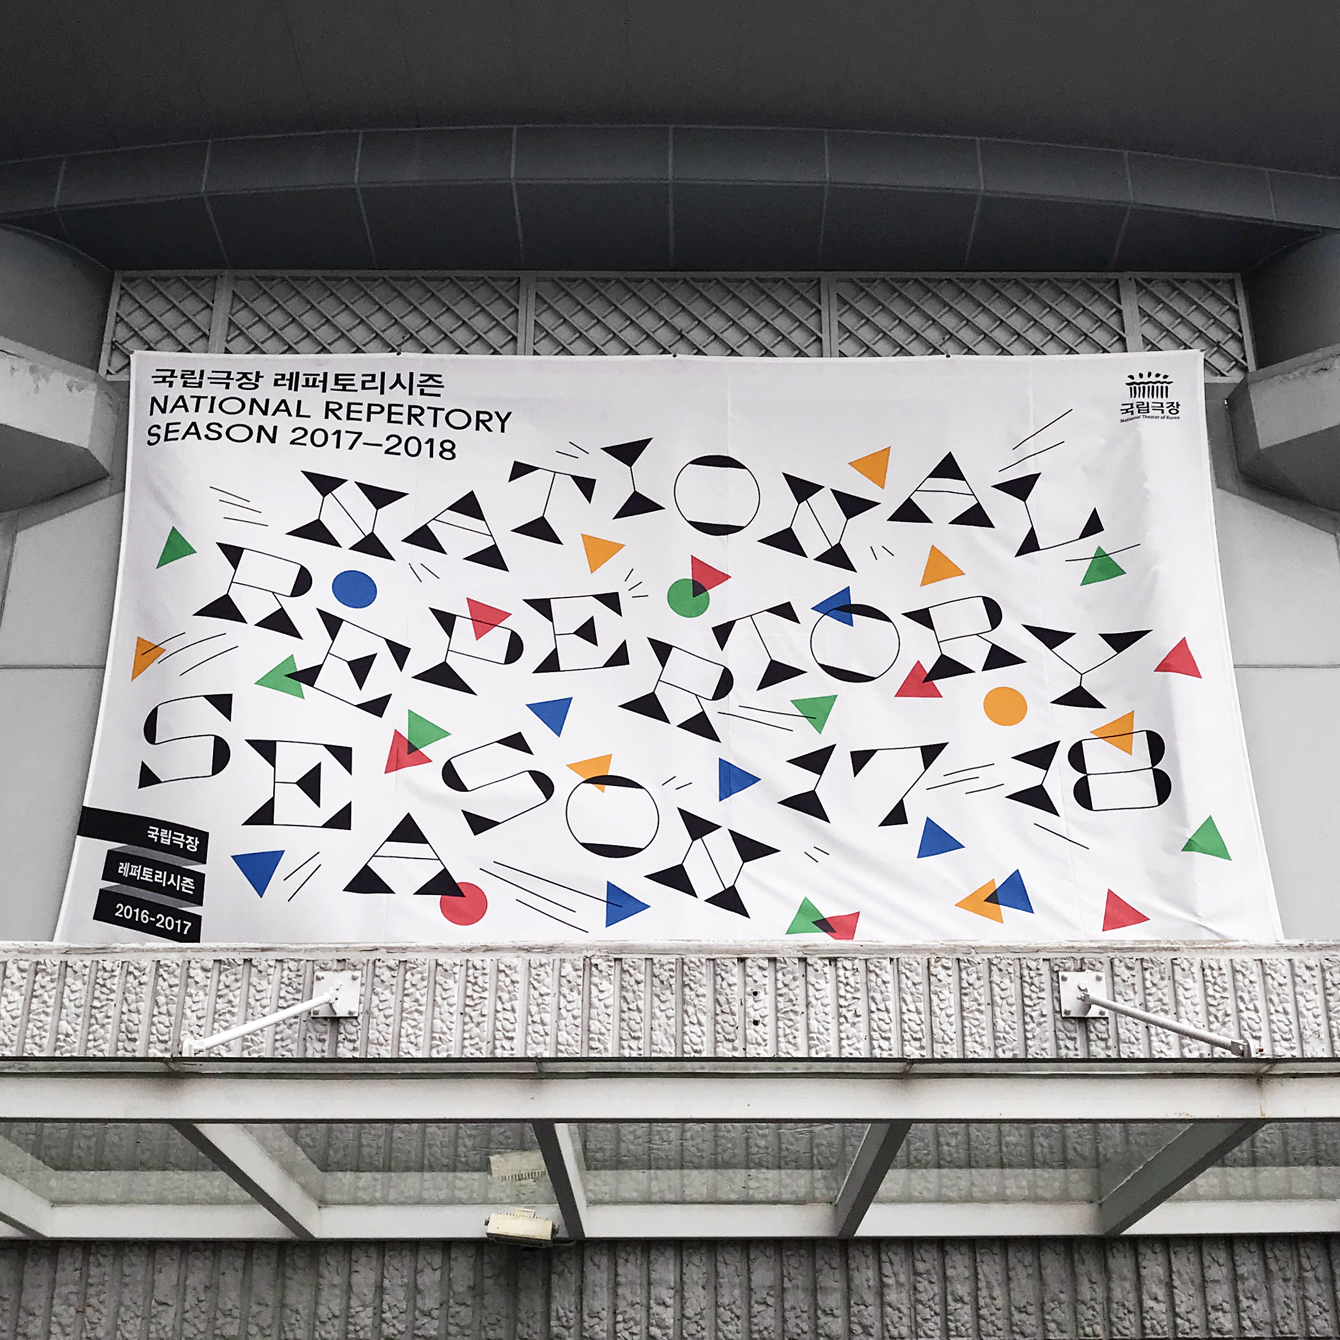 Campaign identity and banner by Studio fnt for the 2017–18 season at the National Theatre of Korea